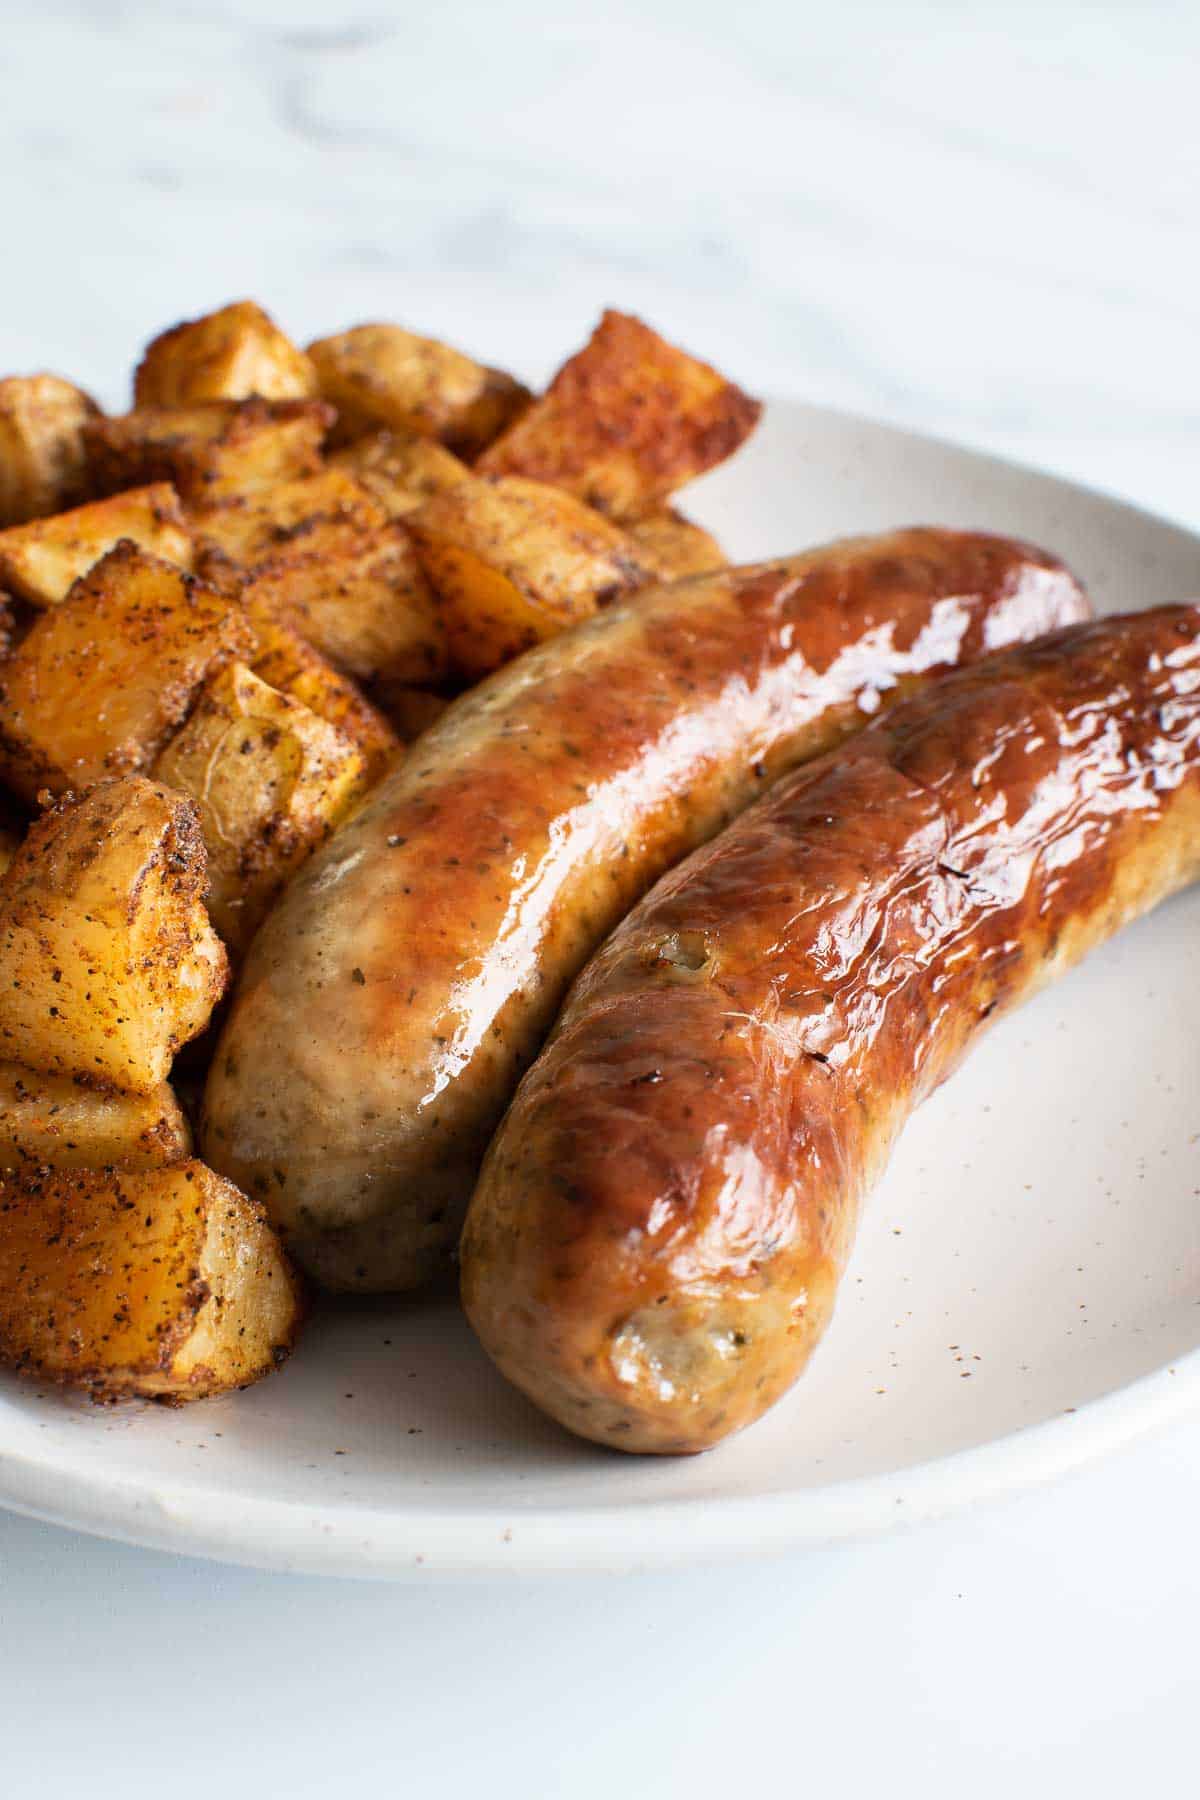 Baked brats and potatoes on a plate.